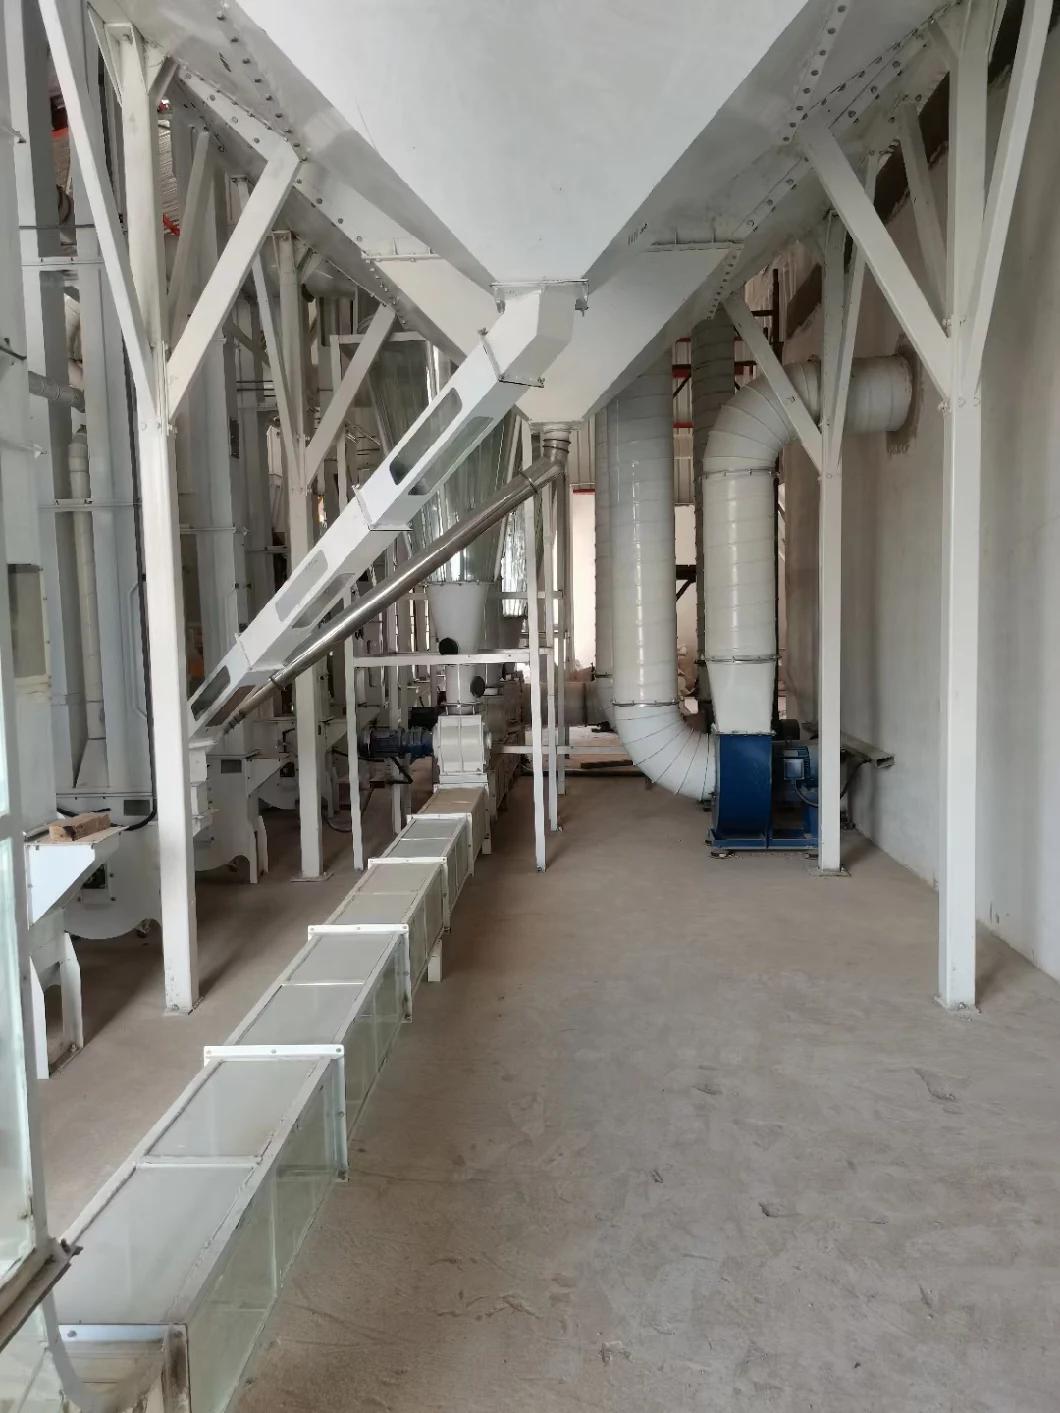 Hot Sale 120tpd Complete Rice Milling Plant Auto Rice Mill Machine in Egypt